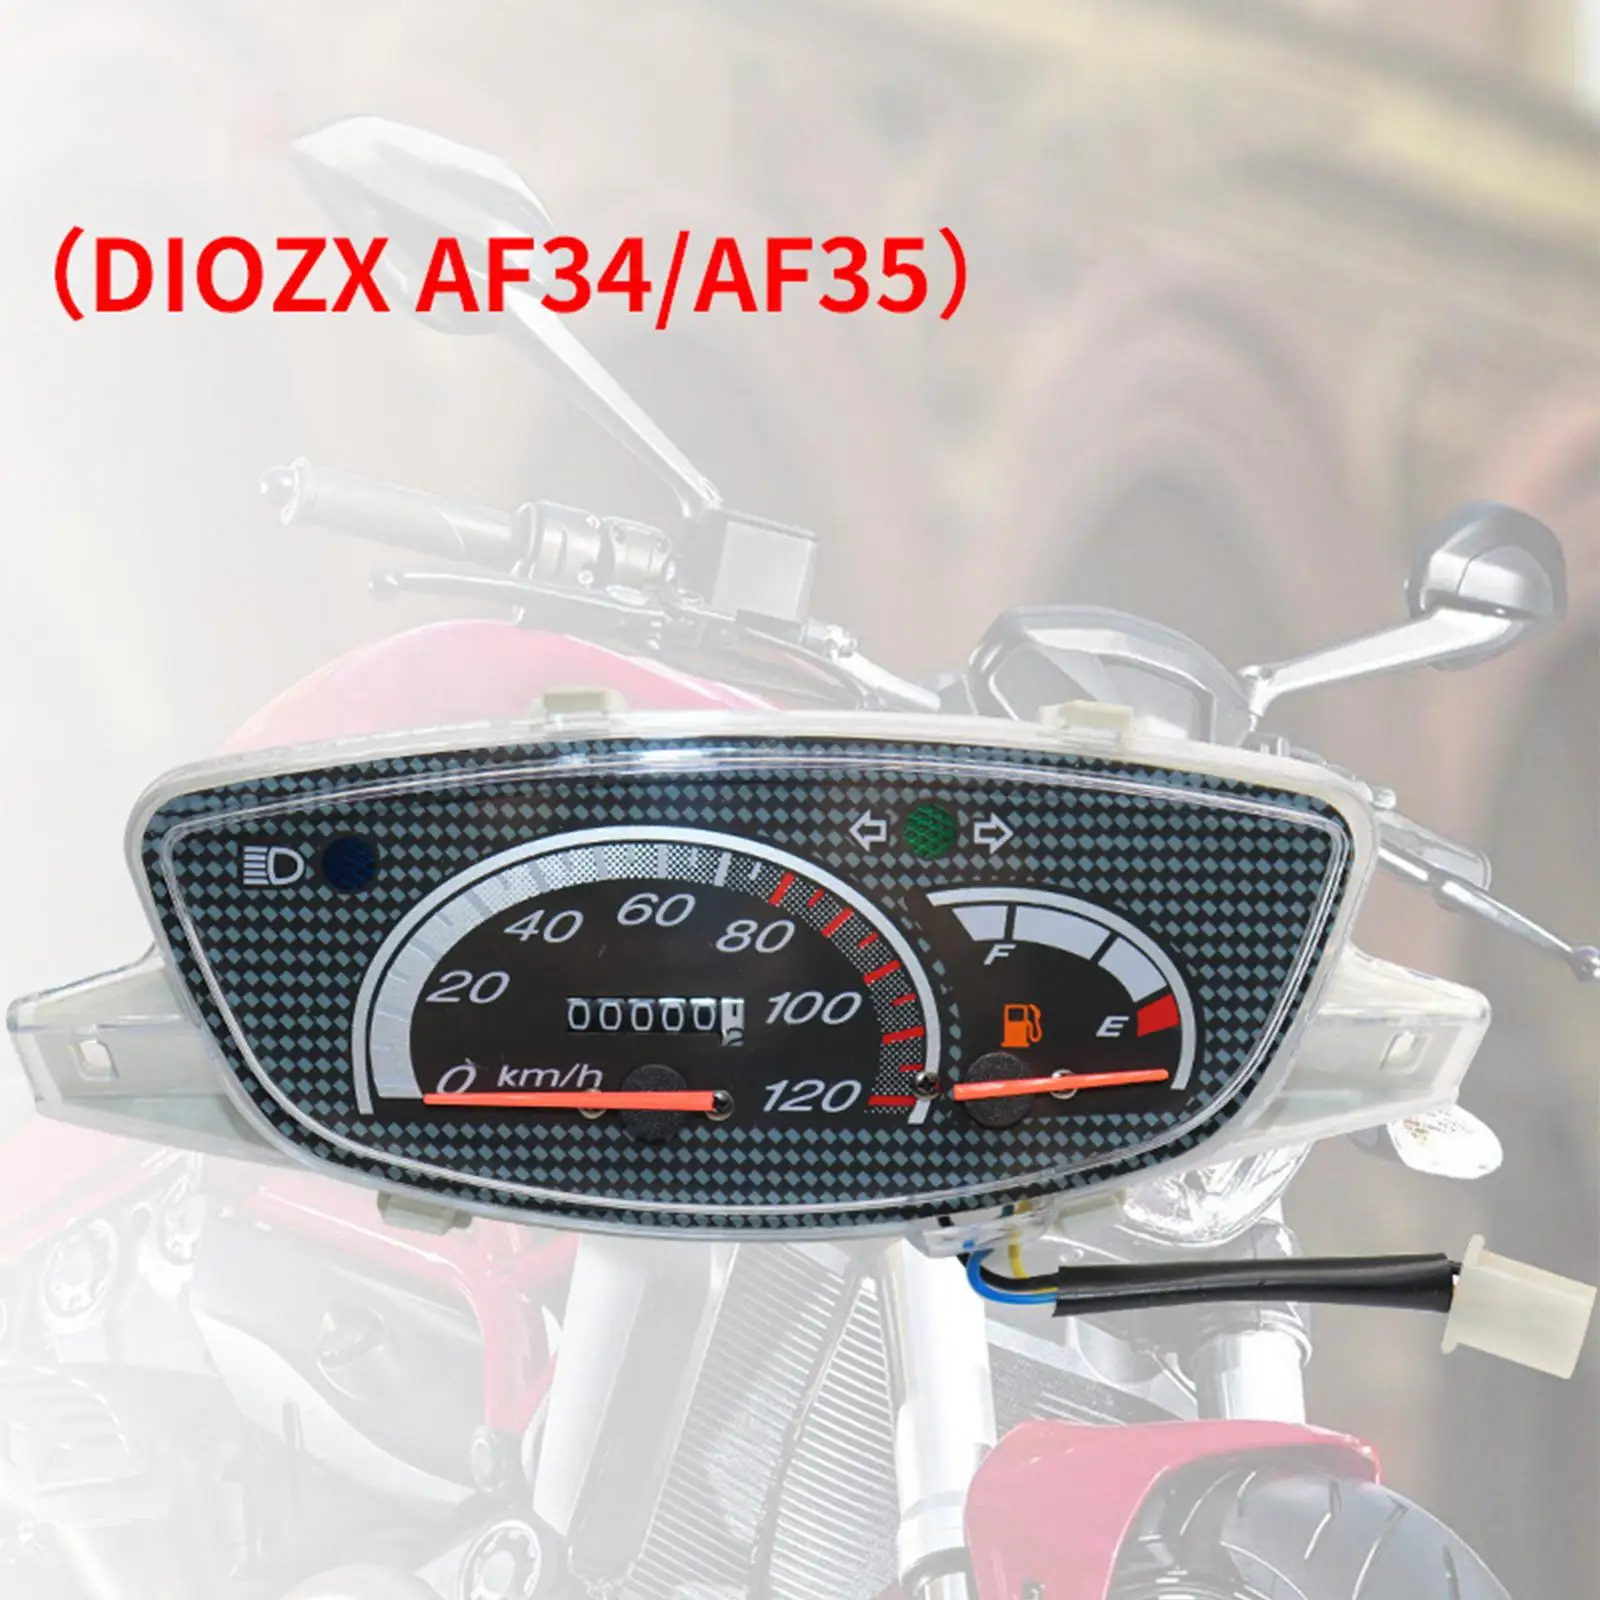 ABS Plastic Motorcycle Speedometer Assembly Instrument Black Odometer for Honda Diozx AF34/AF35 Motorcycle Parts Supplies